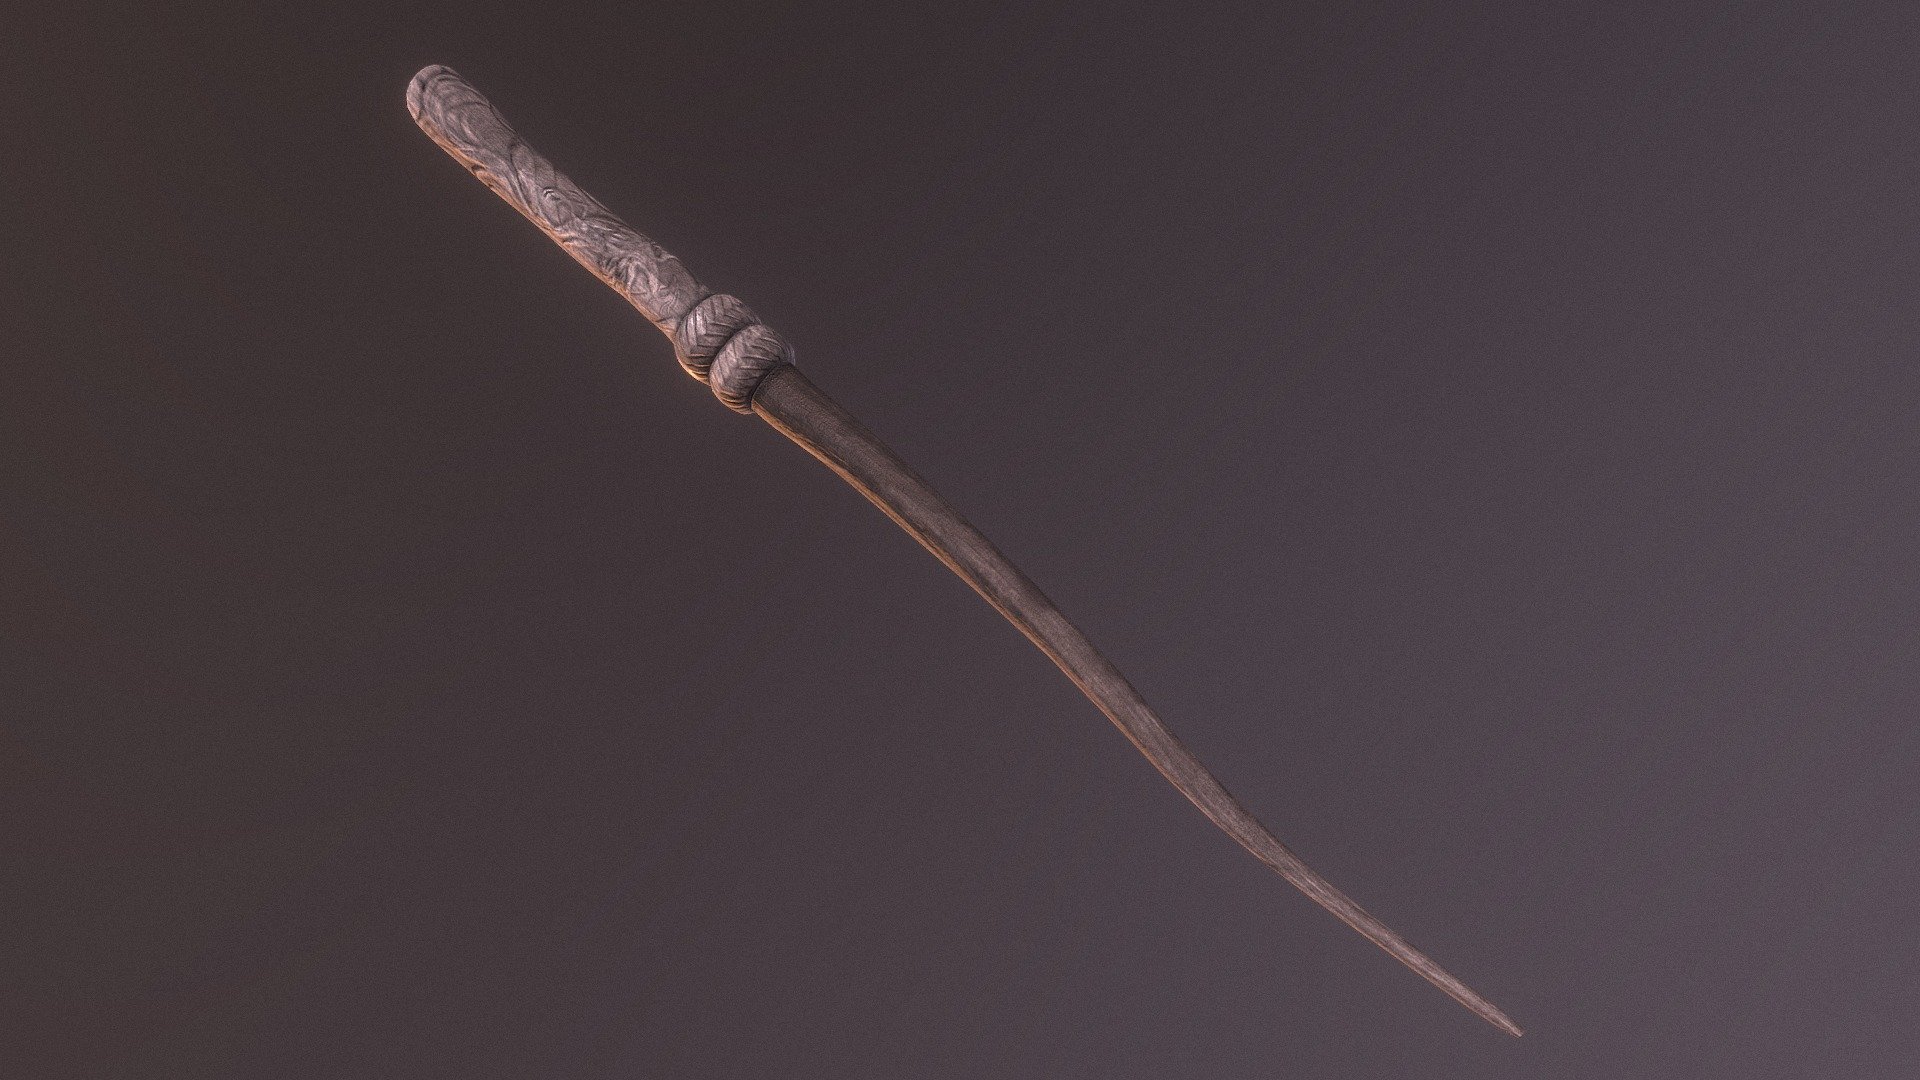 Laurel wood with a phoenix feather core, 11 ¾